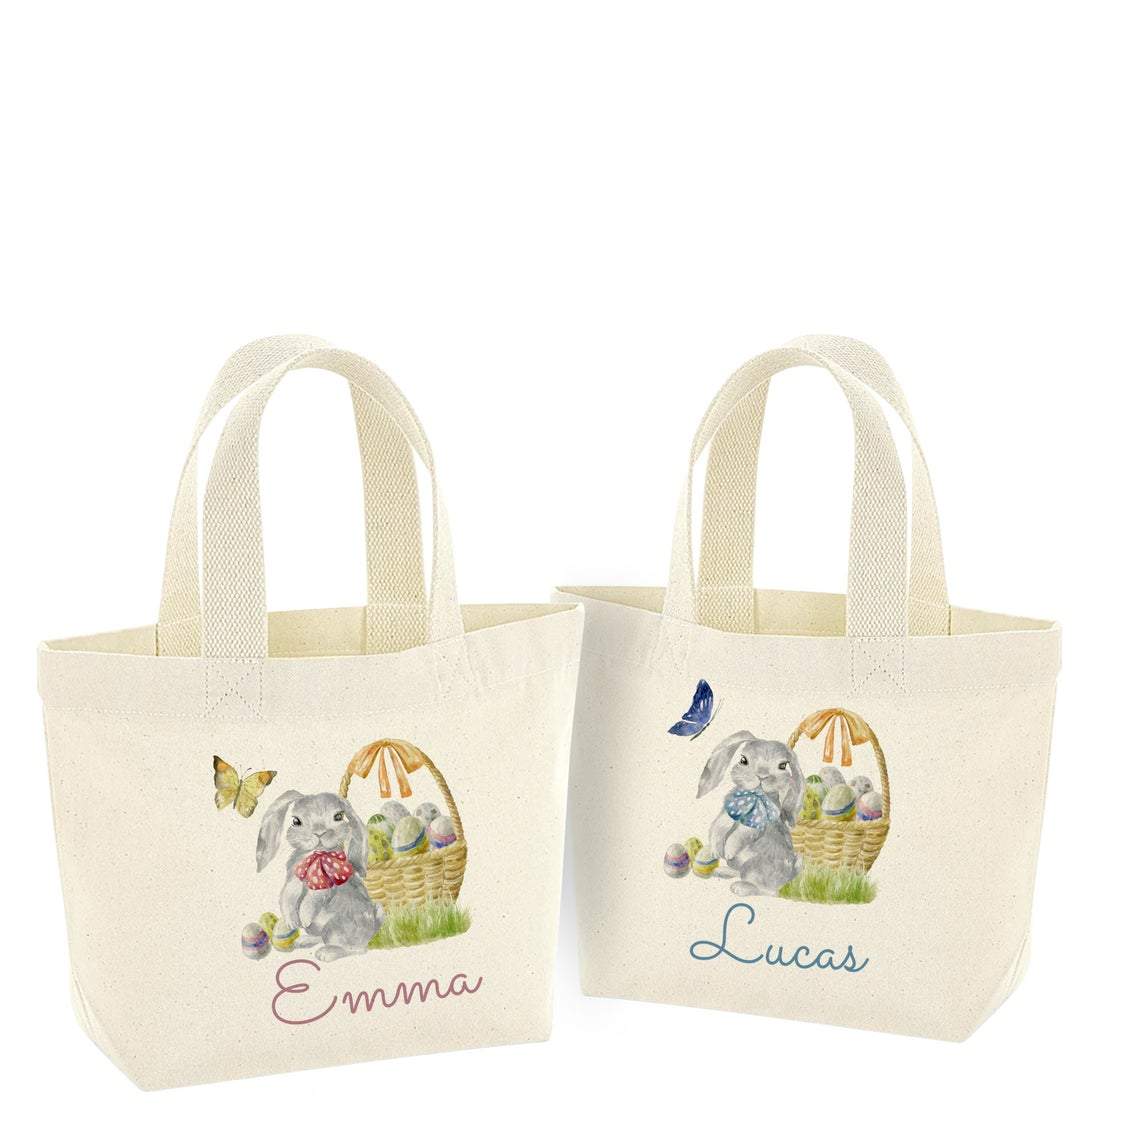 Personalised bunny mini Easter bag with name, Egg hunt bags, Girls or boys baskets